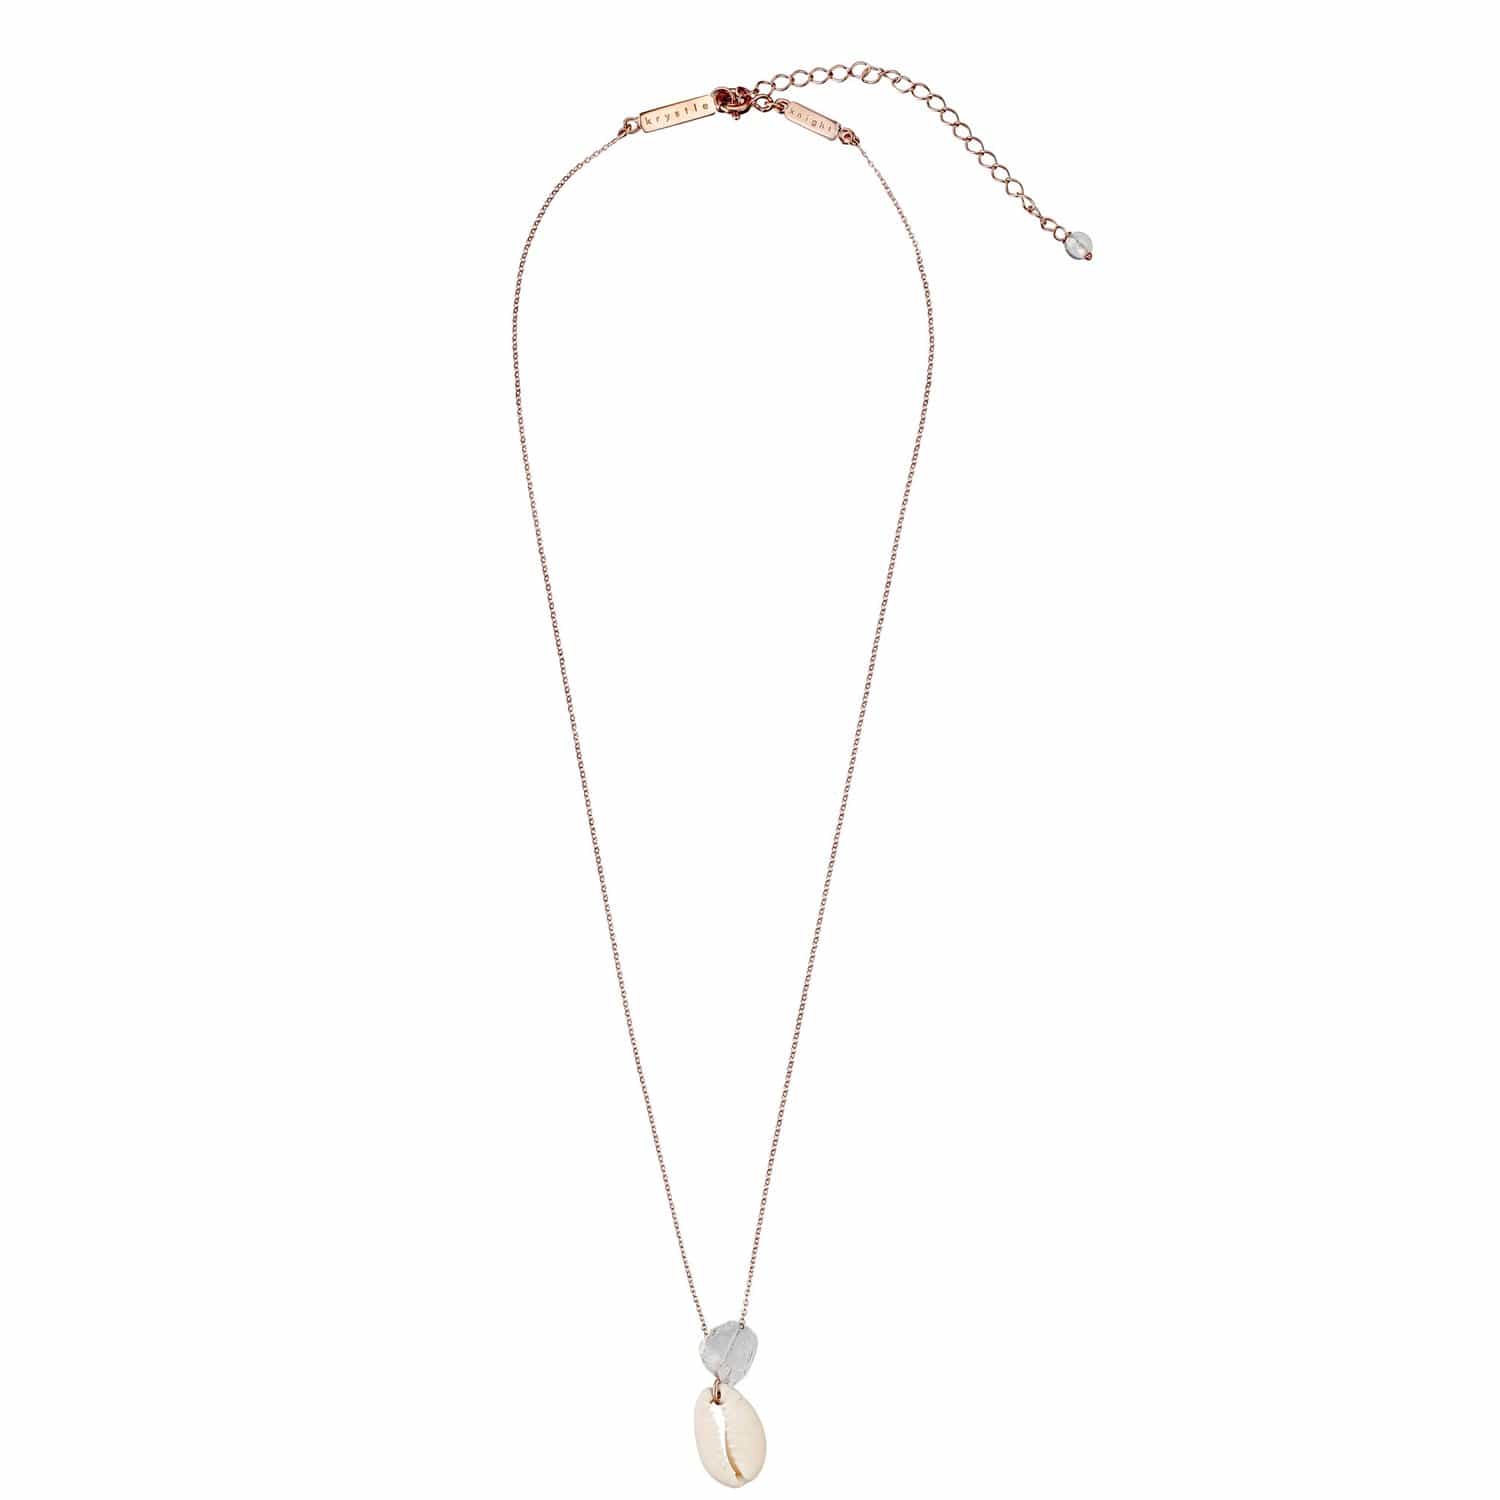 ocean shell + clear quartz necklace 24K Rose Gold Plated by Krystle Knight